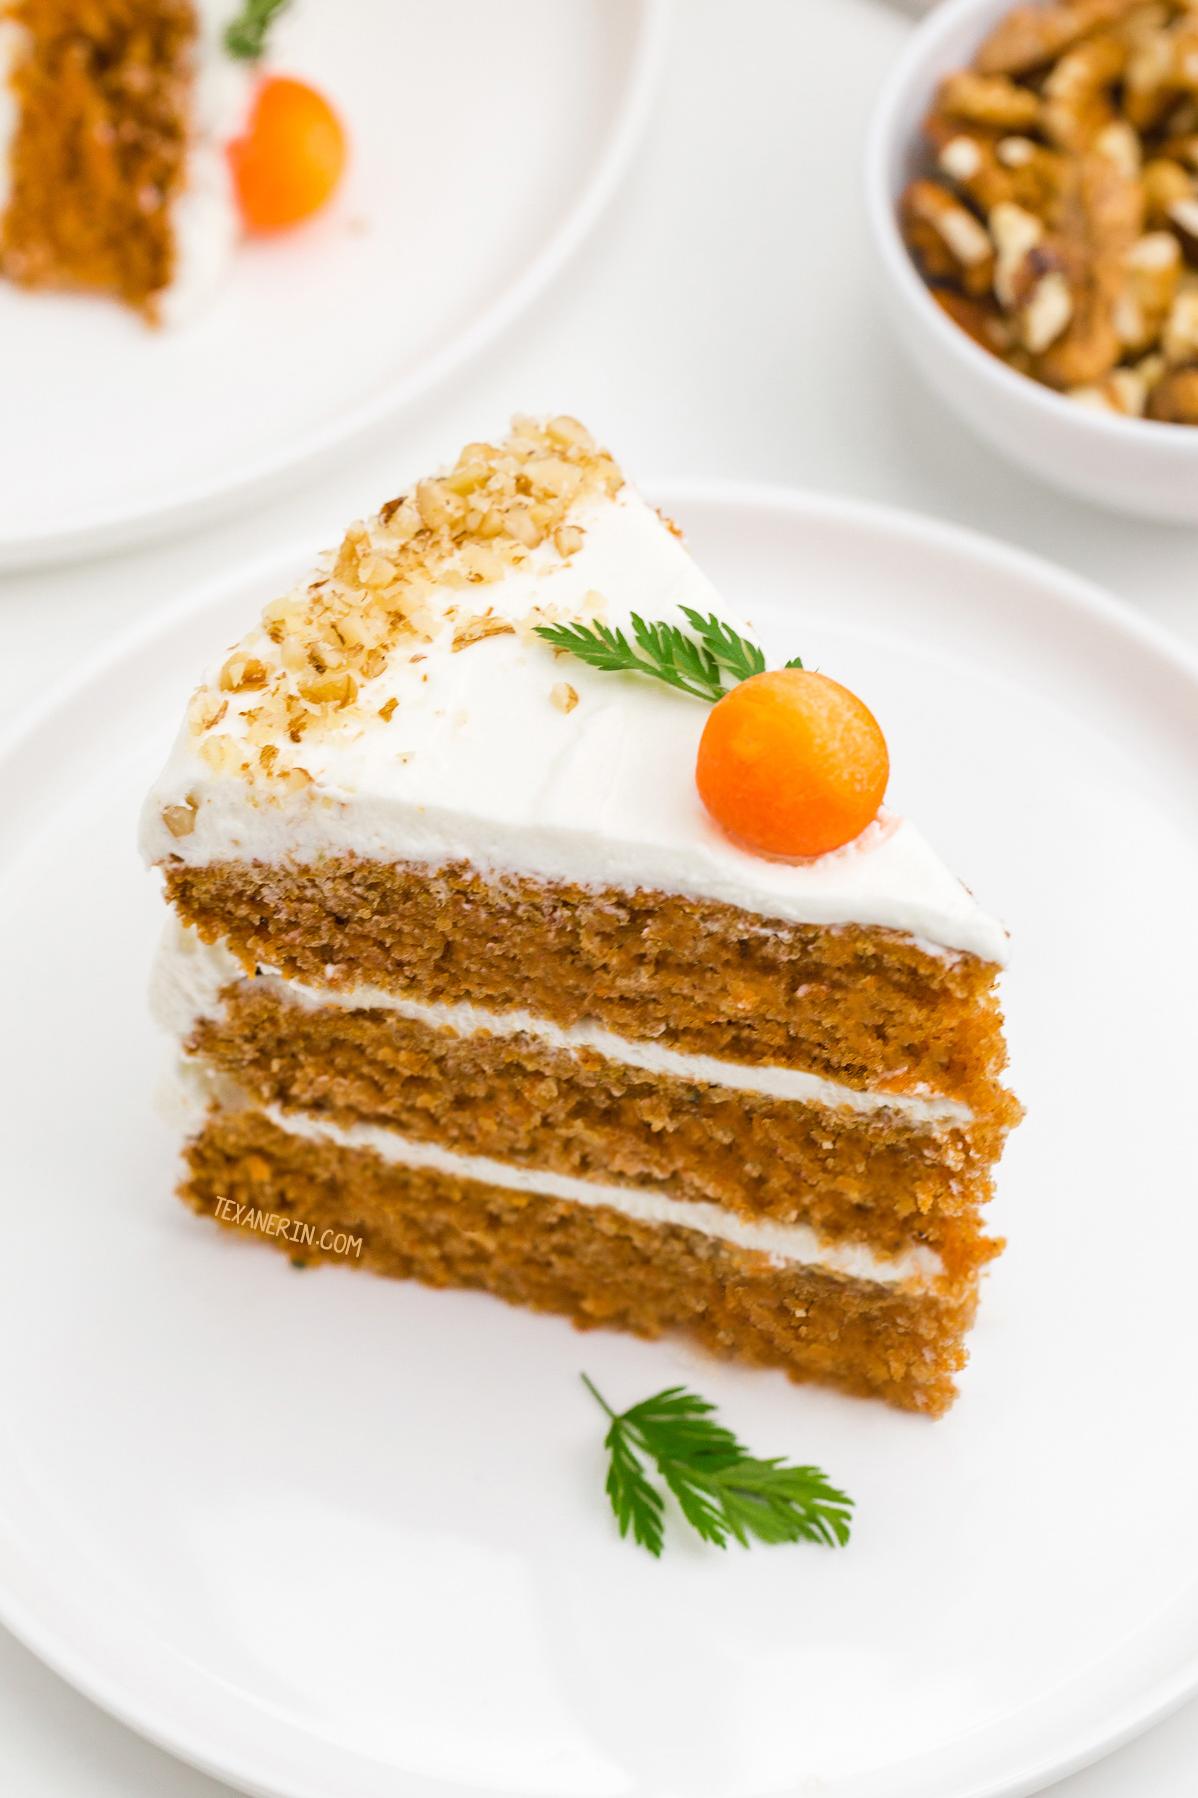  Simple ingredients, incredible taste - this is the carrot cake of your dreams.